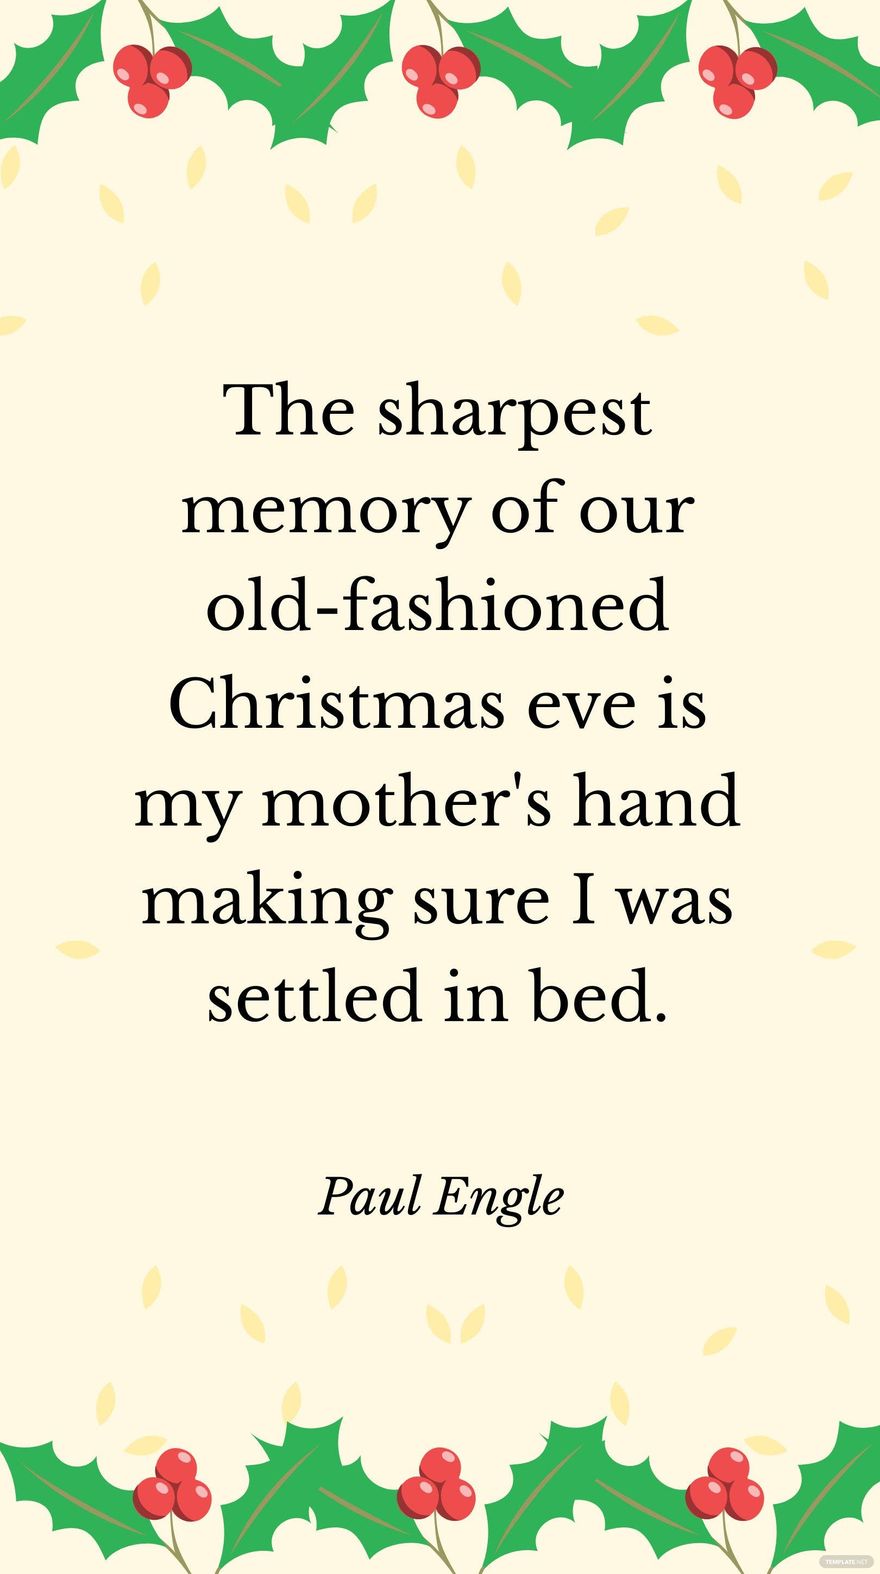 Paul Engle - The sharpest memory of our old-fashioned Christmas eve is my mother's hand making sure I was settled in bed.